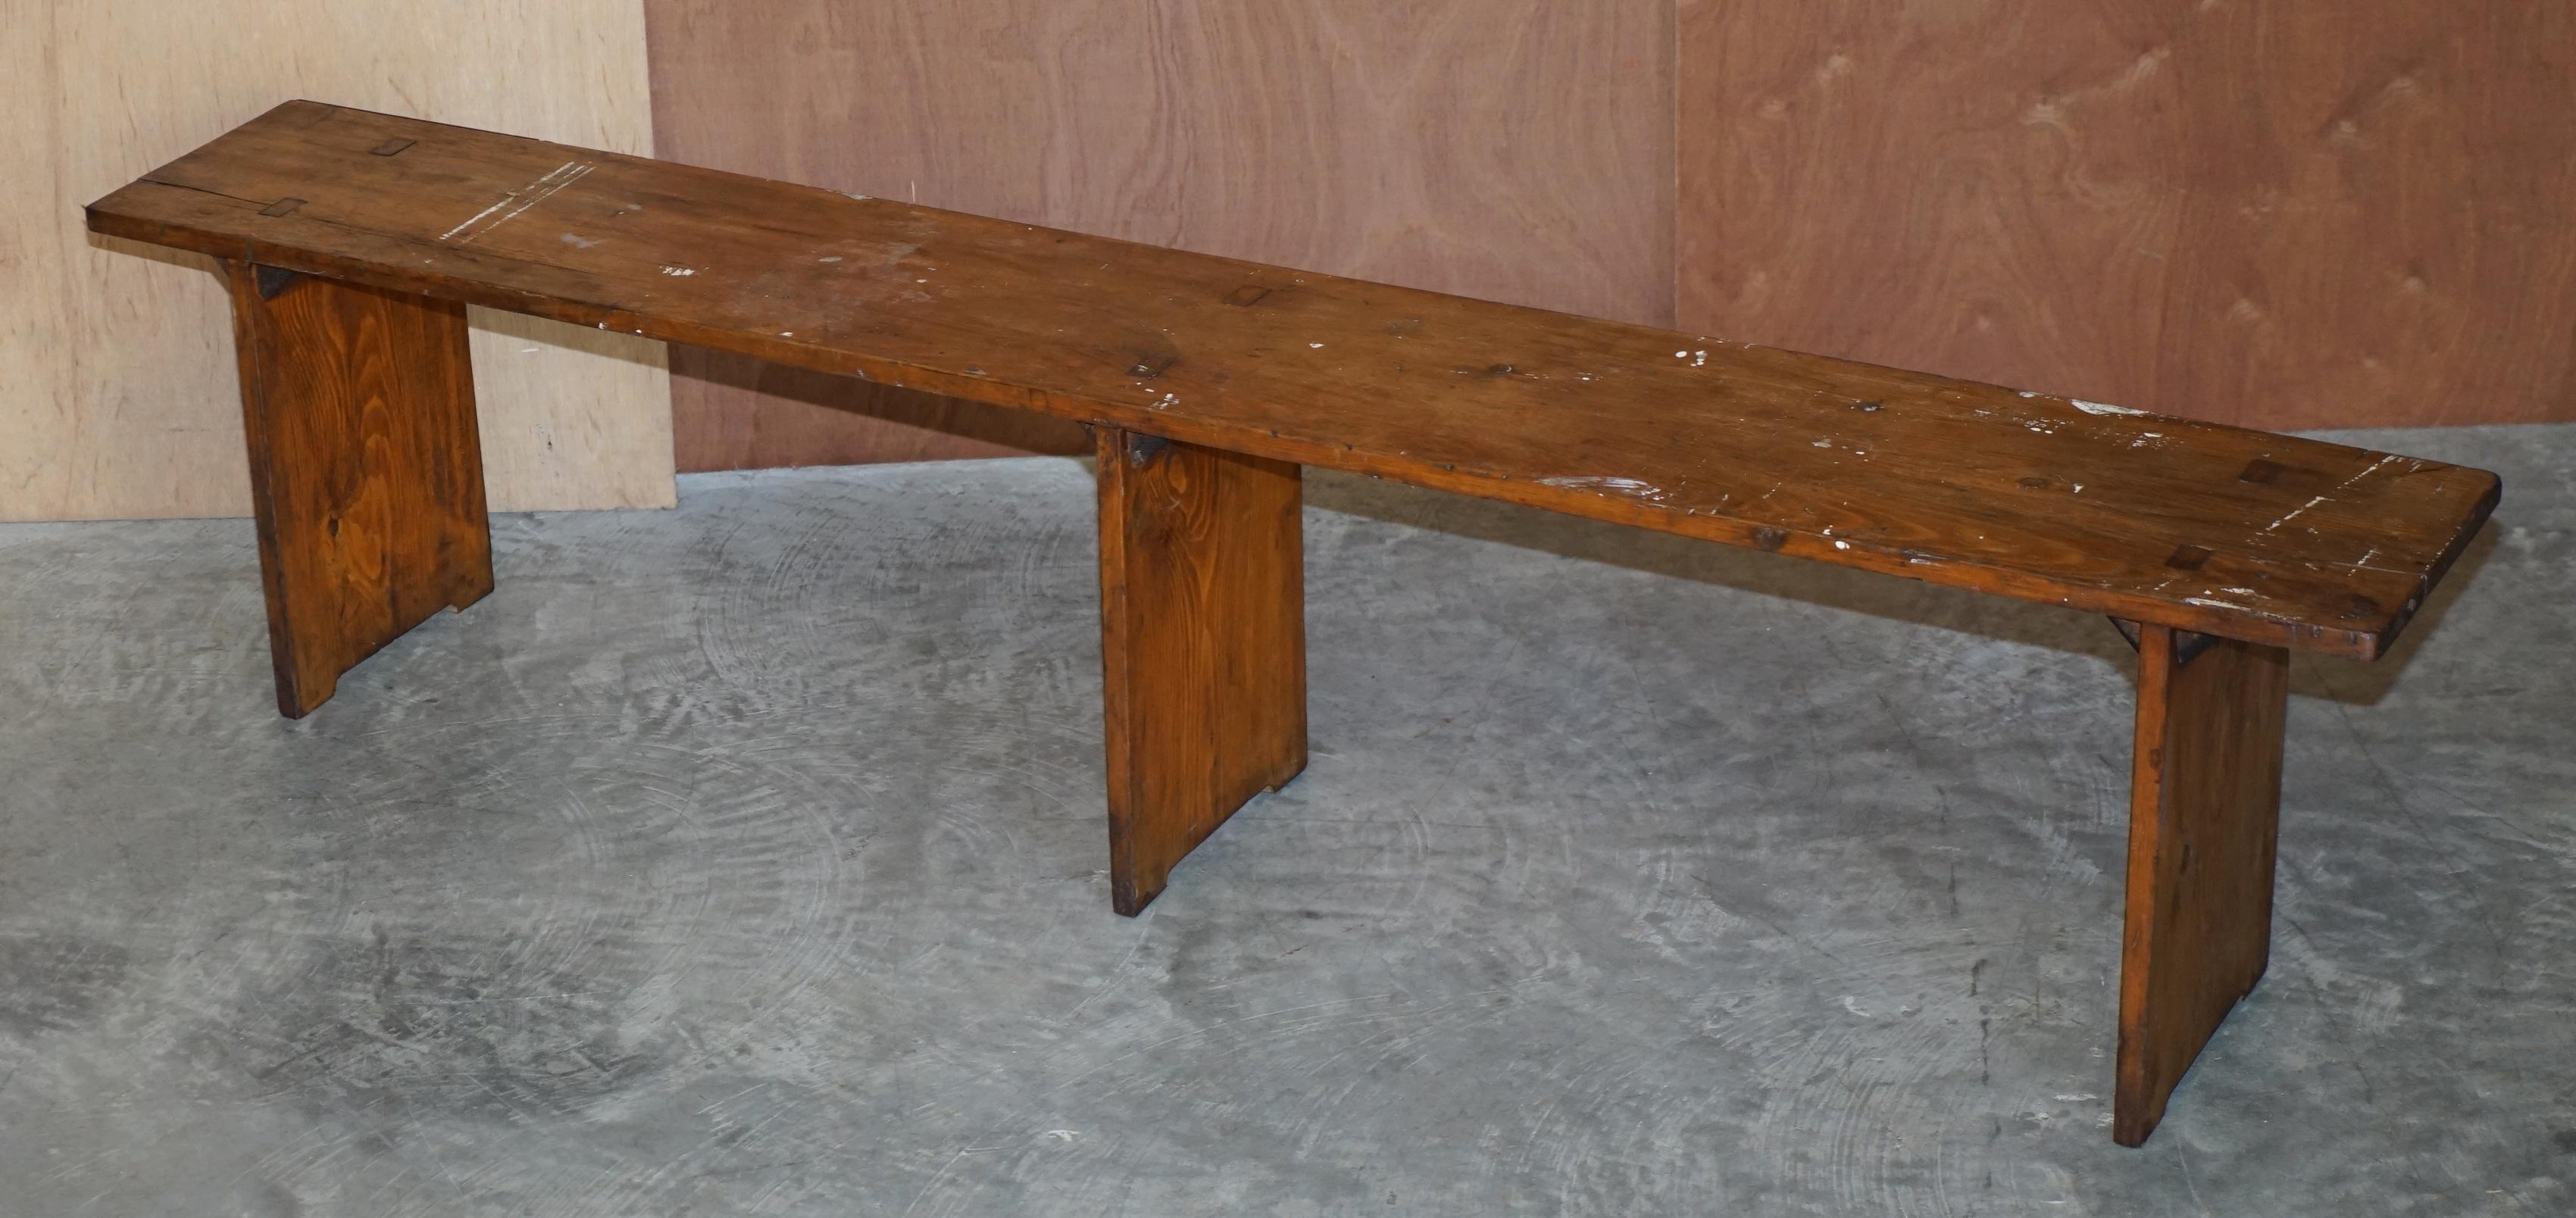 Pair of Lovely Vintage Pitch Pine Benches / Seats for a Refecorty Dining Table For Sale 3